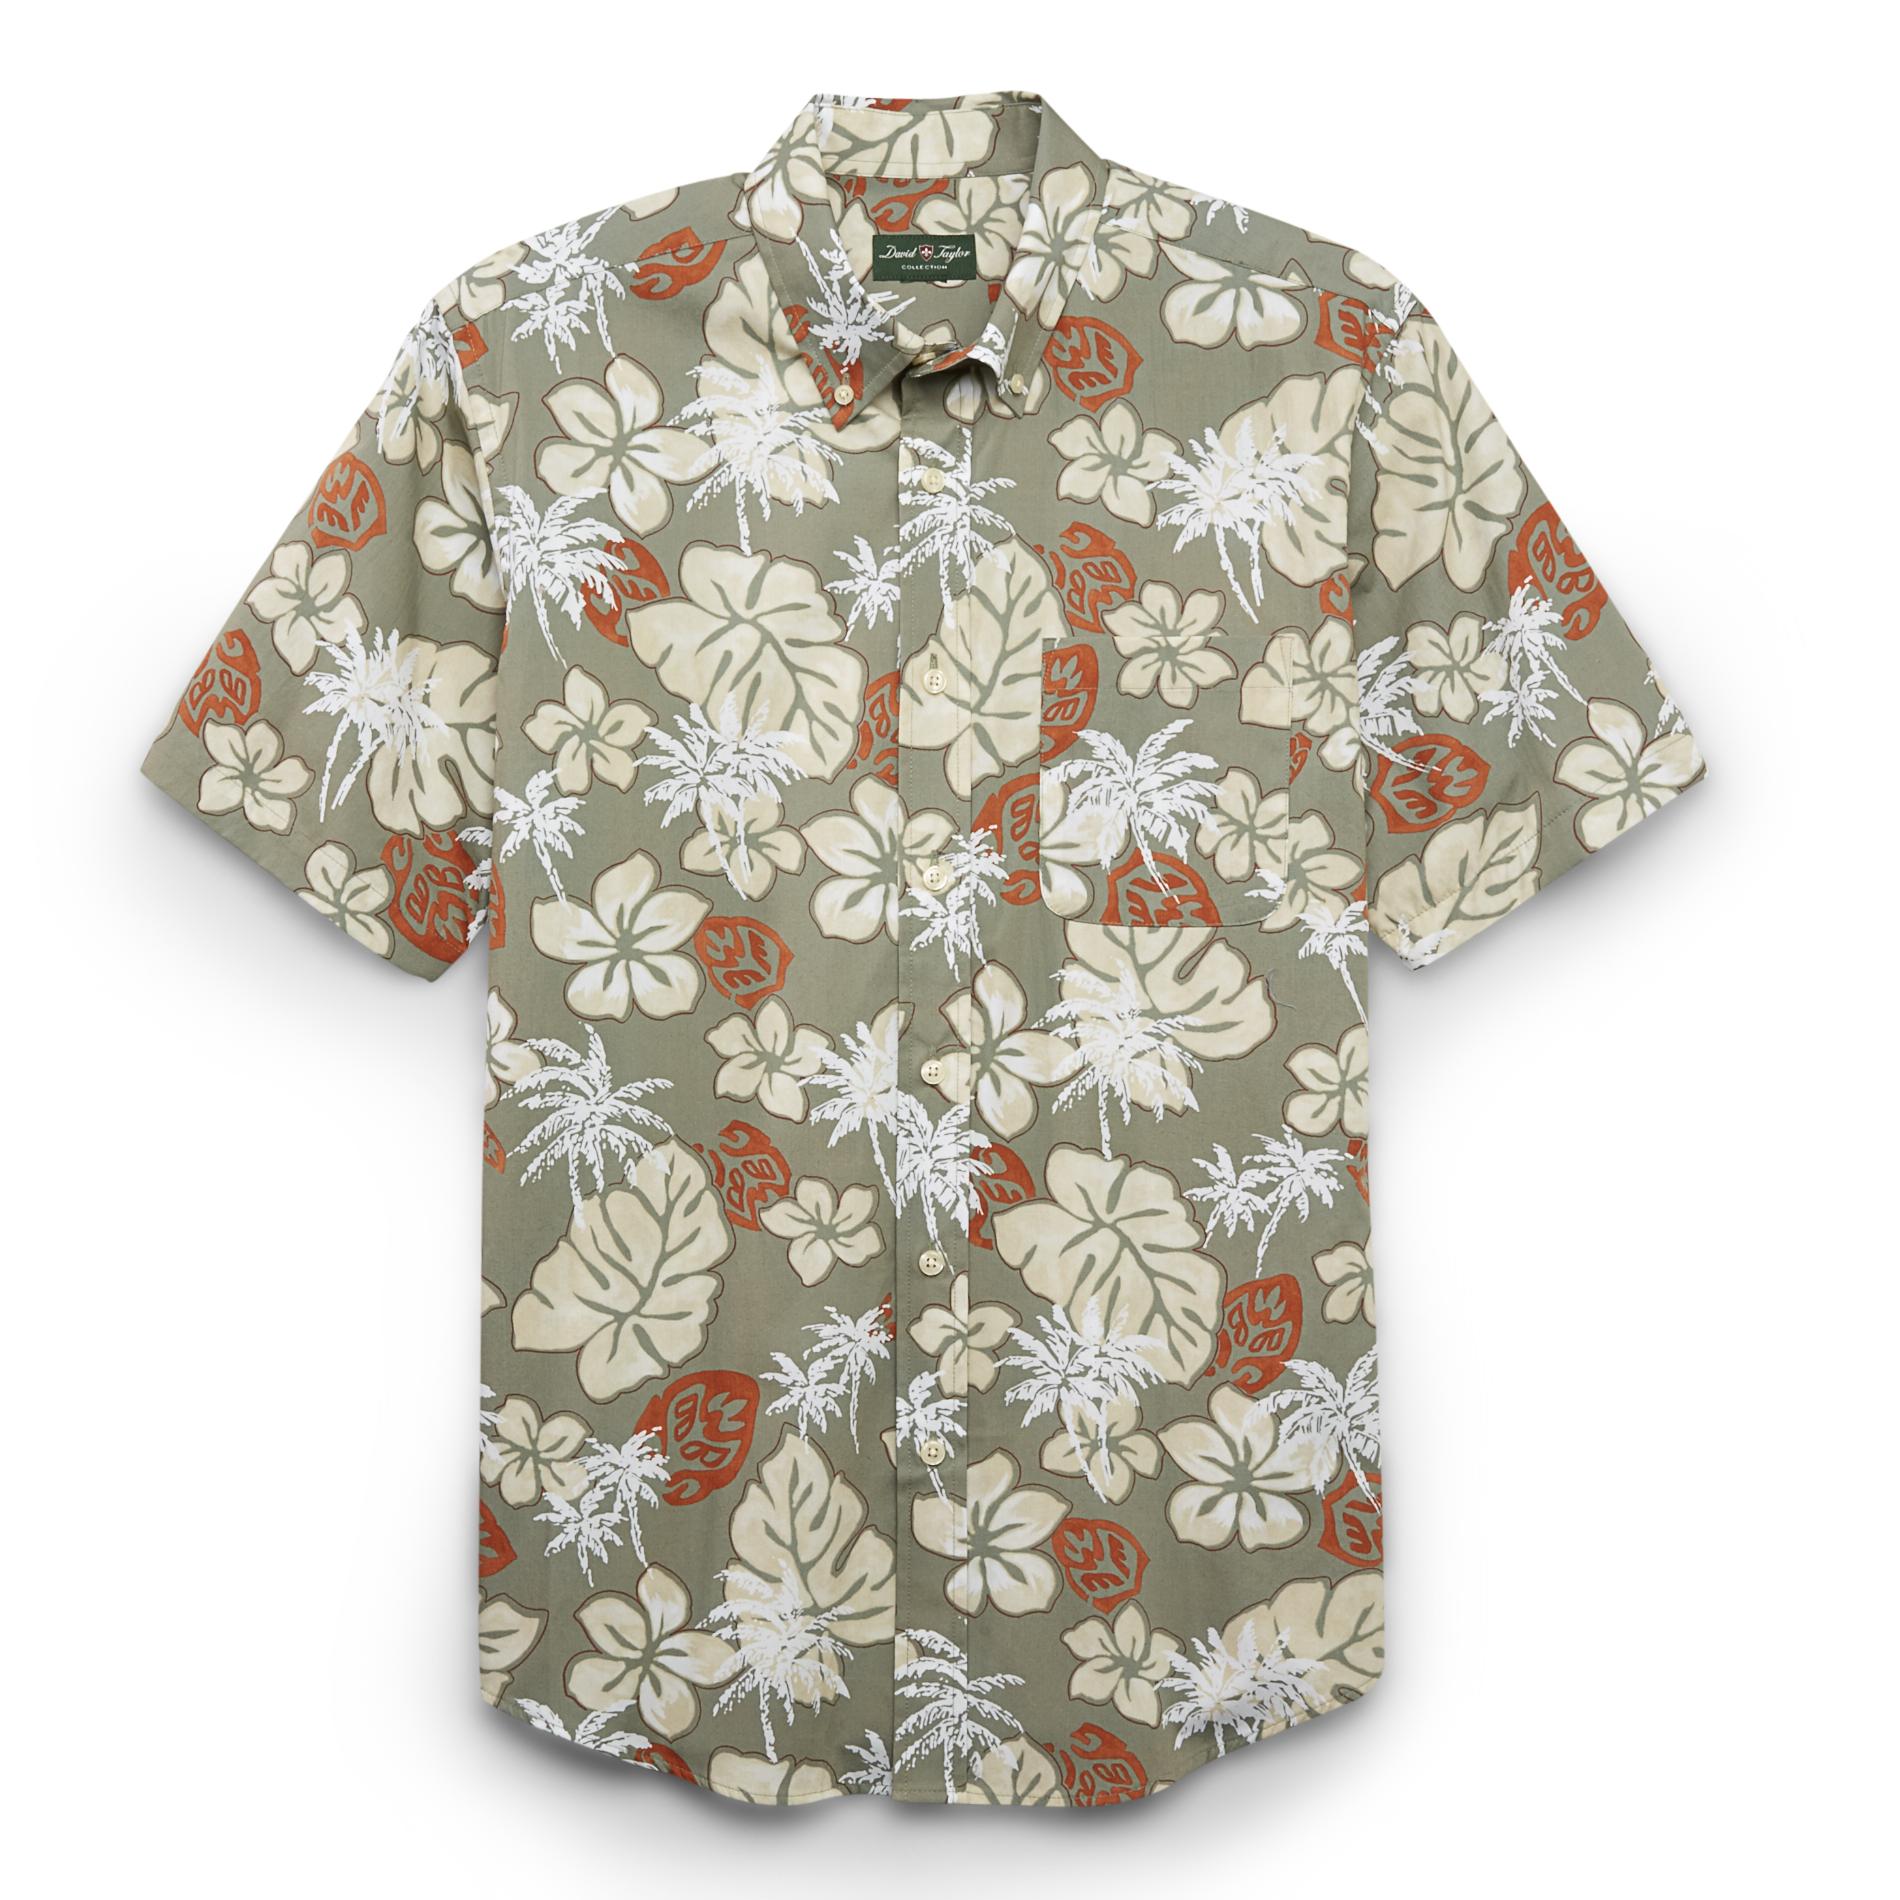 David Taylor Collection Men's Short-Sleeve Button-Front Shirt - Floral & Palm Trees